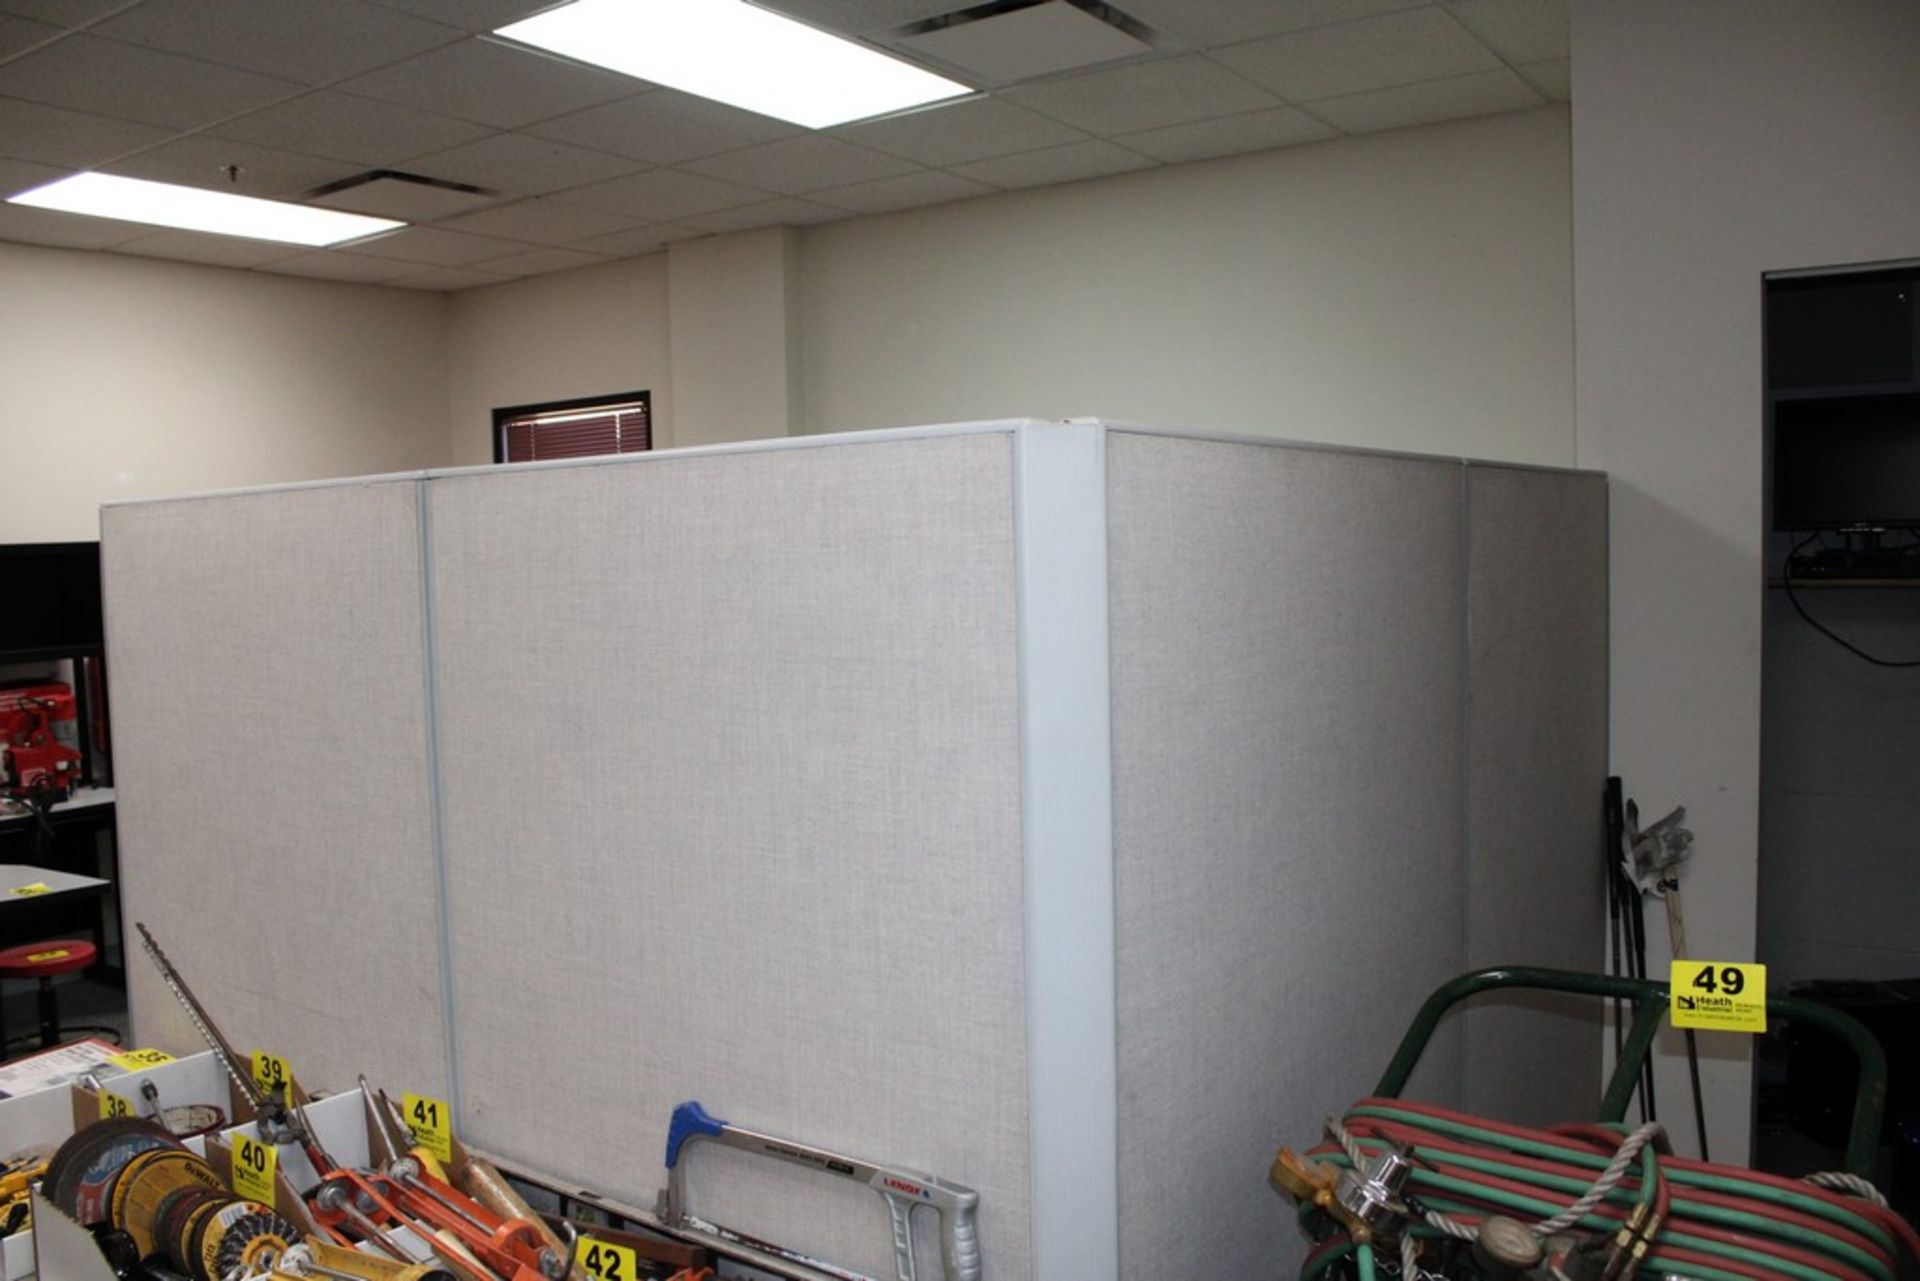 L-SHAPED OFFICE CUBICLE, 78" X 60" - Image 2 of 2